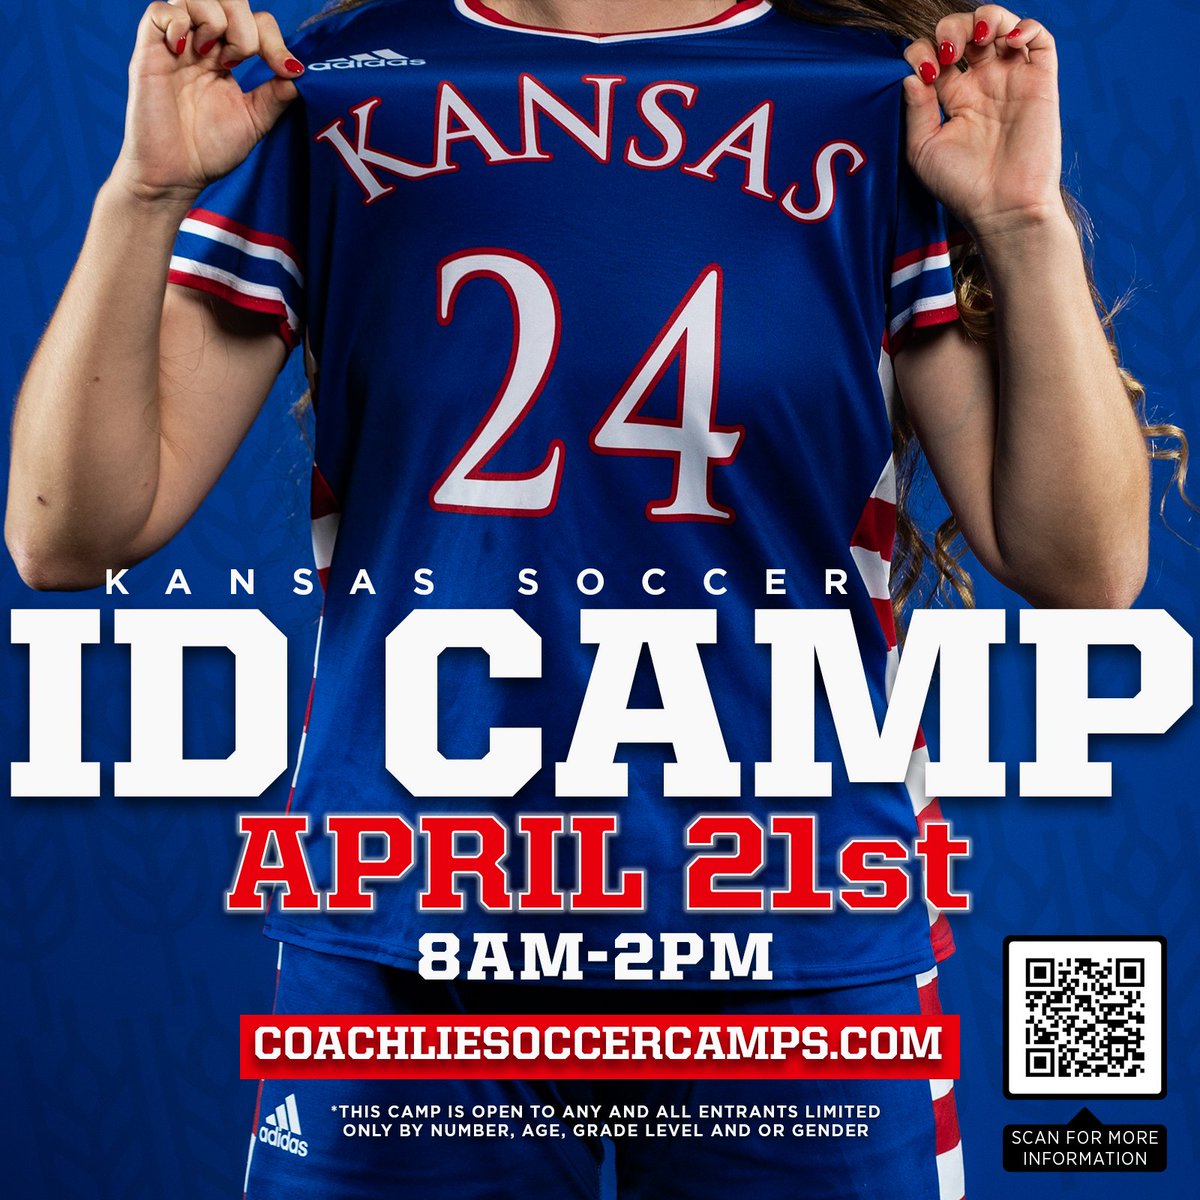 Less than a month away from our Spring ID camp! Register ➝ coachliesoccercamps.com Andddd stick around after for our exhibition match vs. Washburn! #RockChalk